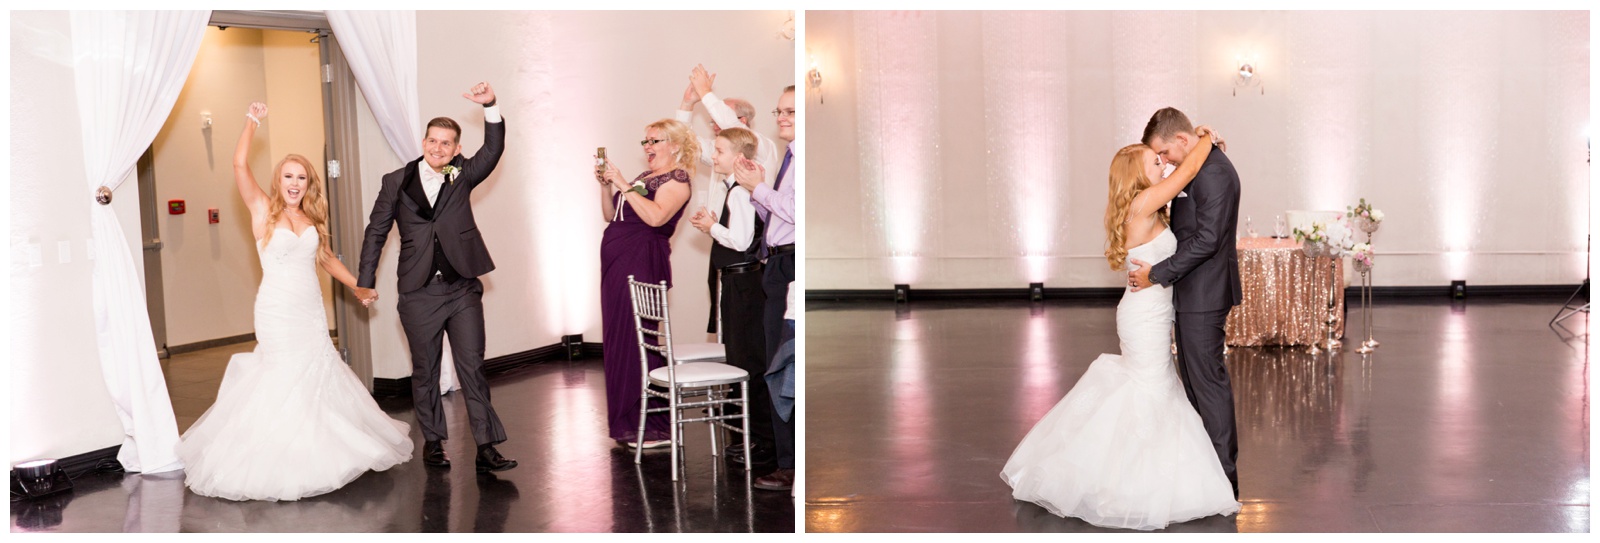 Wedding Reception and First Dance at SoHo 63 